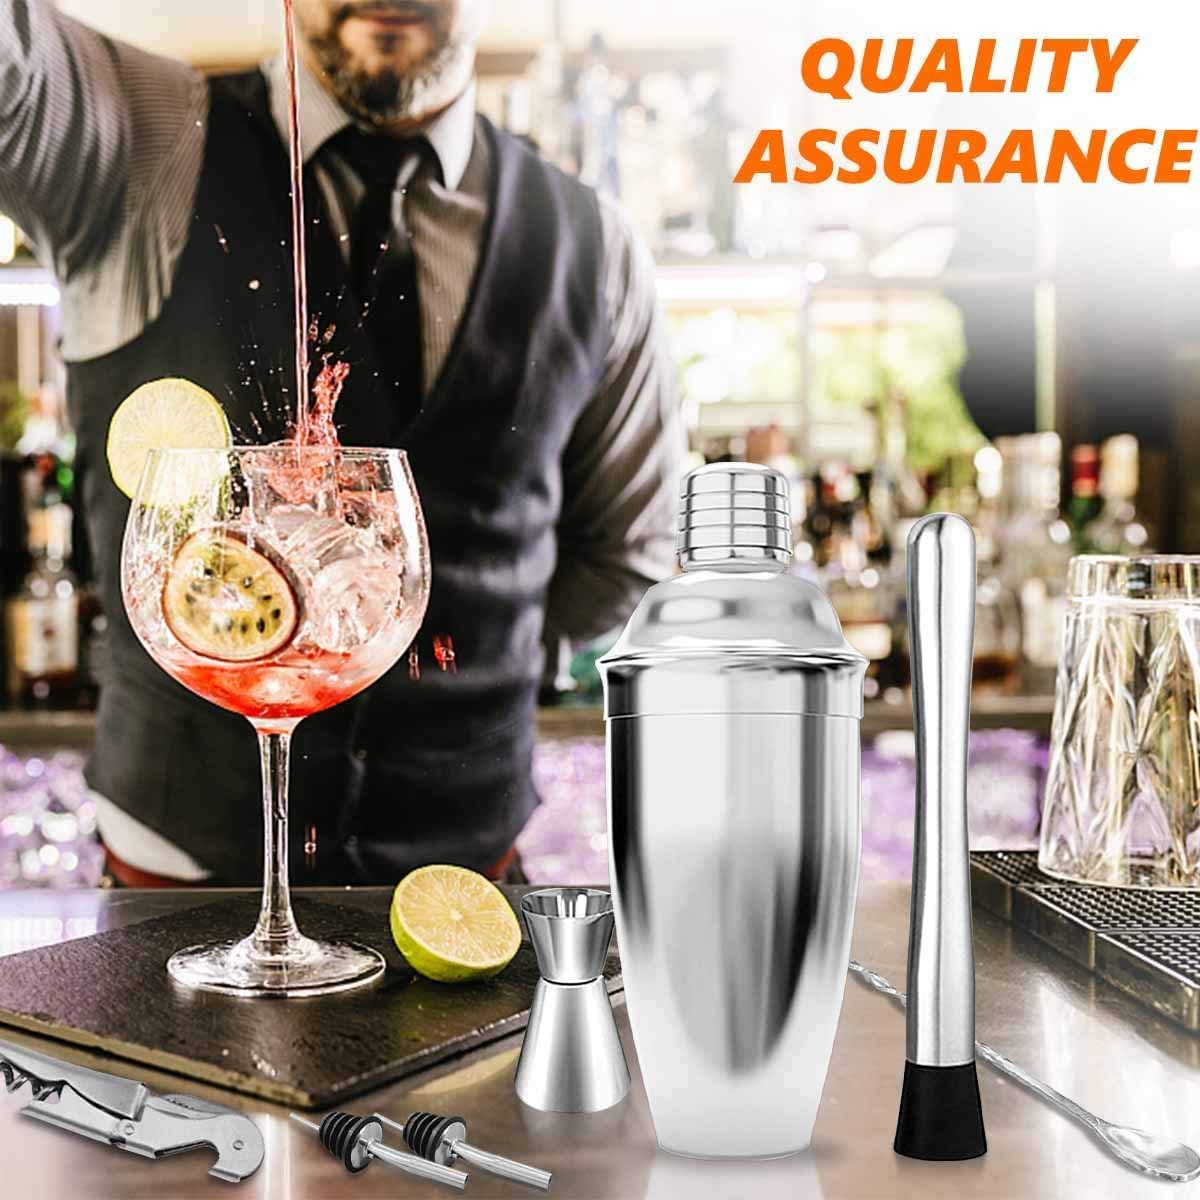 ‎NJ Premium Cocktail Shaker Bar Tools Set, Stainless Steel Martini Mixer, Measuring Jigger, Mixing Spoon,2 Liquor Pourers, Muddler and Corkscrew. Suitable for all bartender lovers, Perfect gift : 7 Pcs